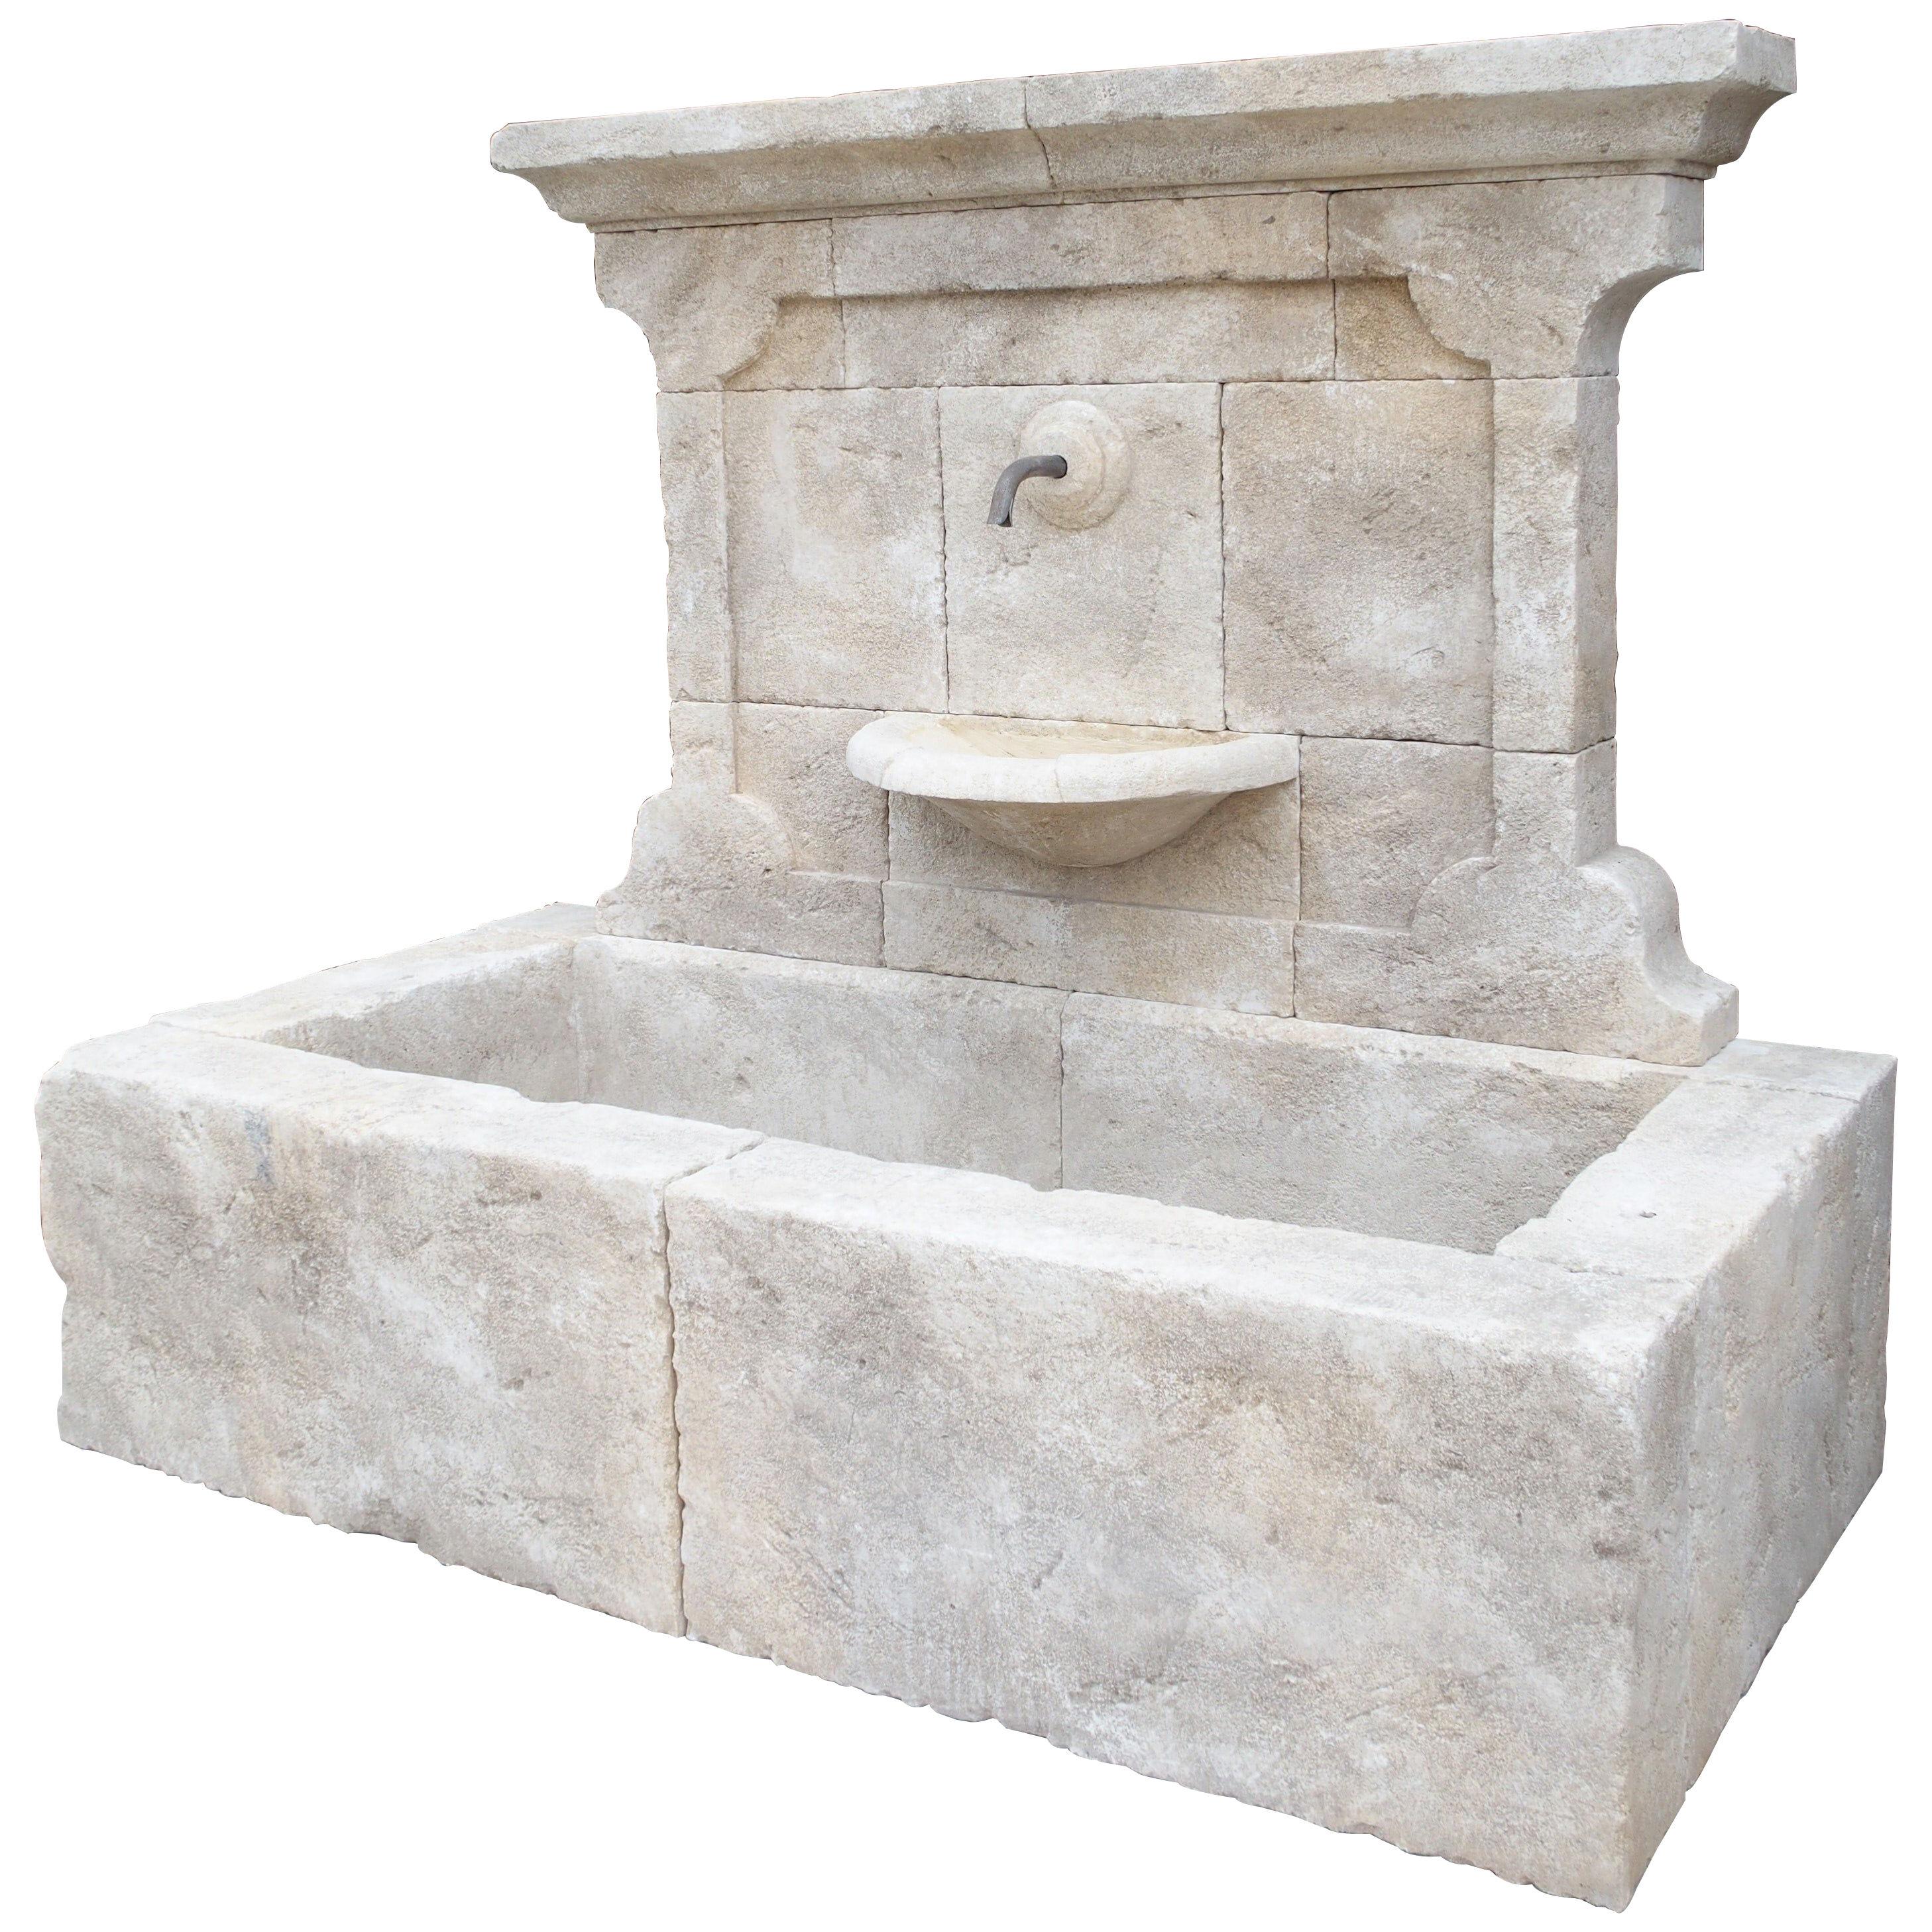 Carved French Stone Wall Fountain with Cast Iron Spout and Spill Bowl